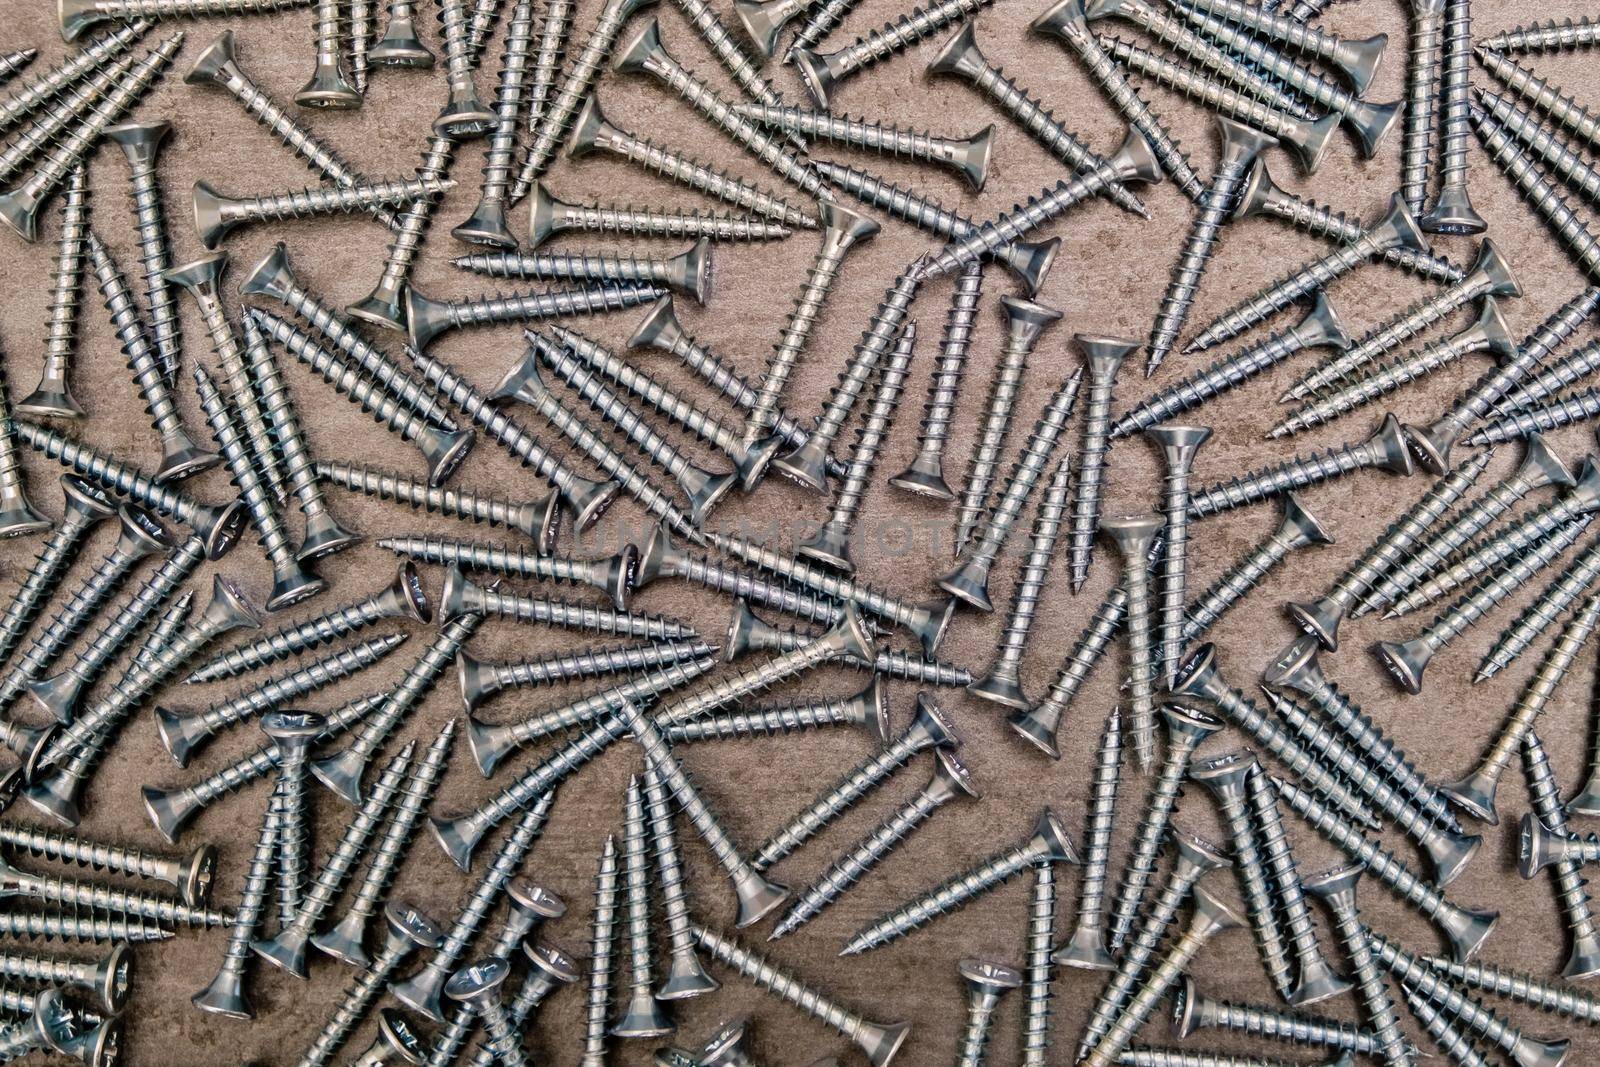 A lot of silver metal screws on the table close-up, background.